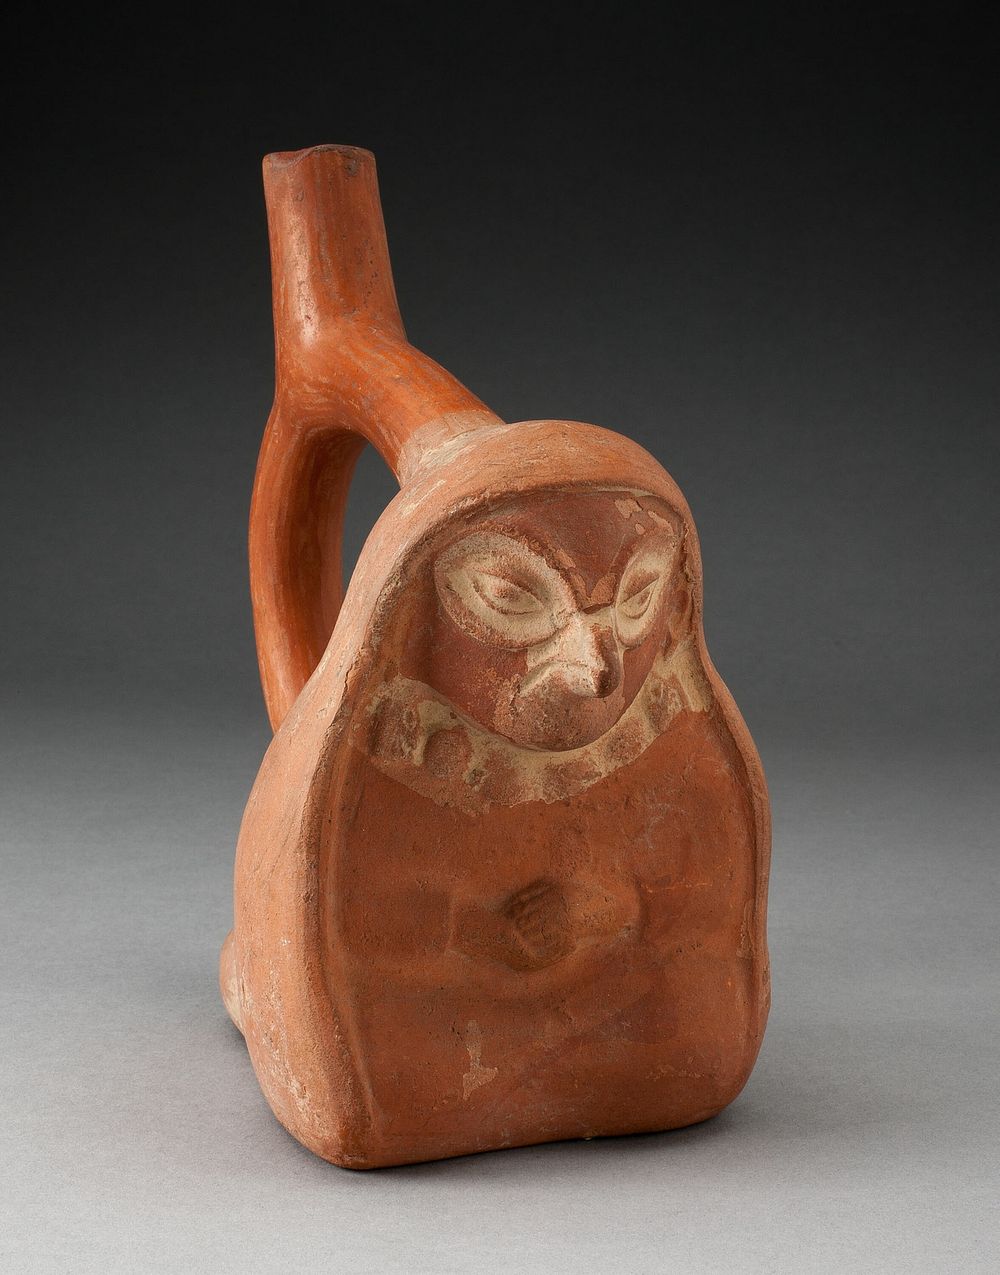 Handle Spout Vessel in the Form of a Seated Anthropomorphic Bird Wearing a Shawl by Moche